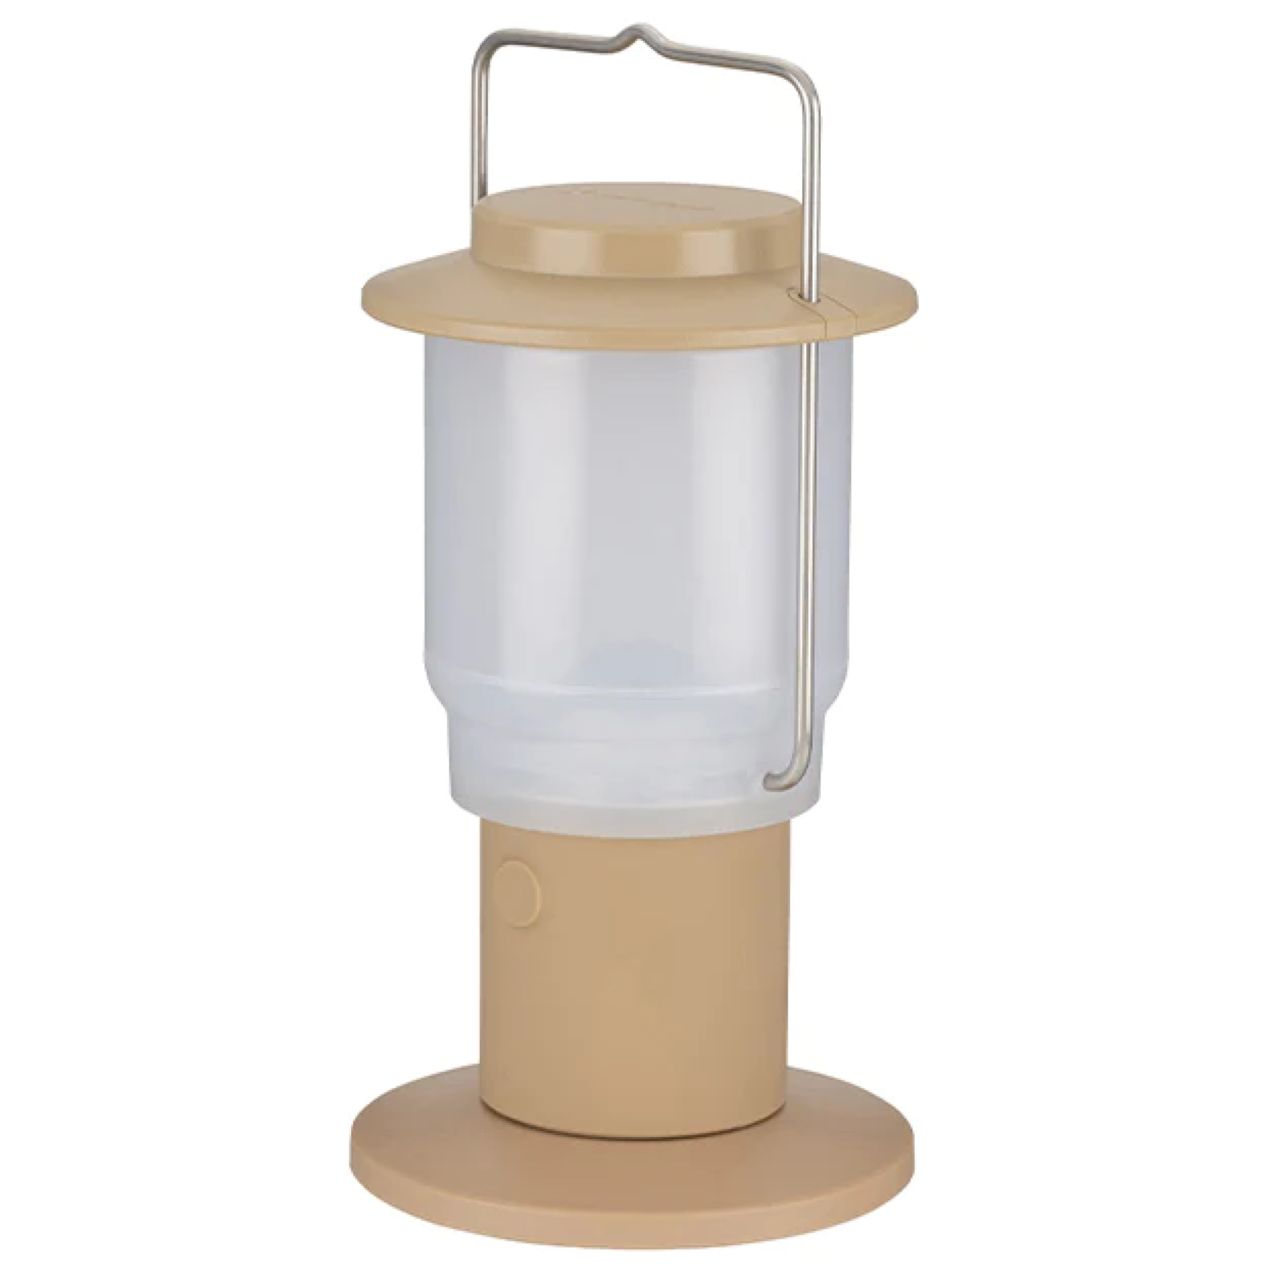 Home & Camp Resin and Stainless Steel Portable Lantern